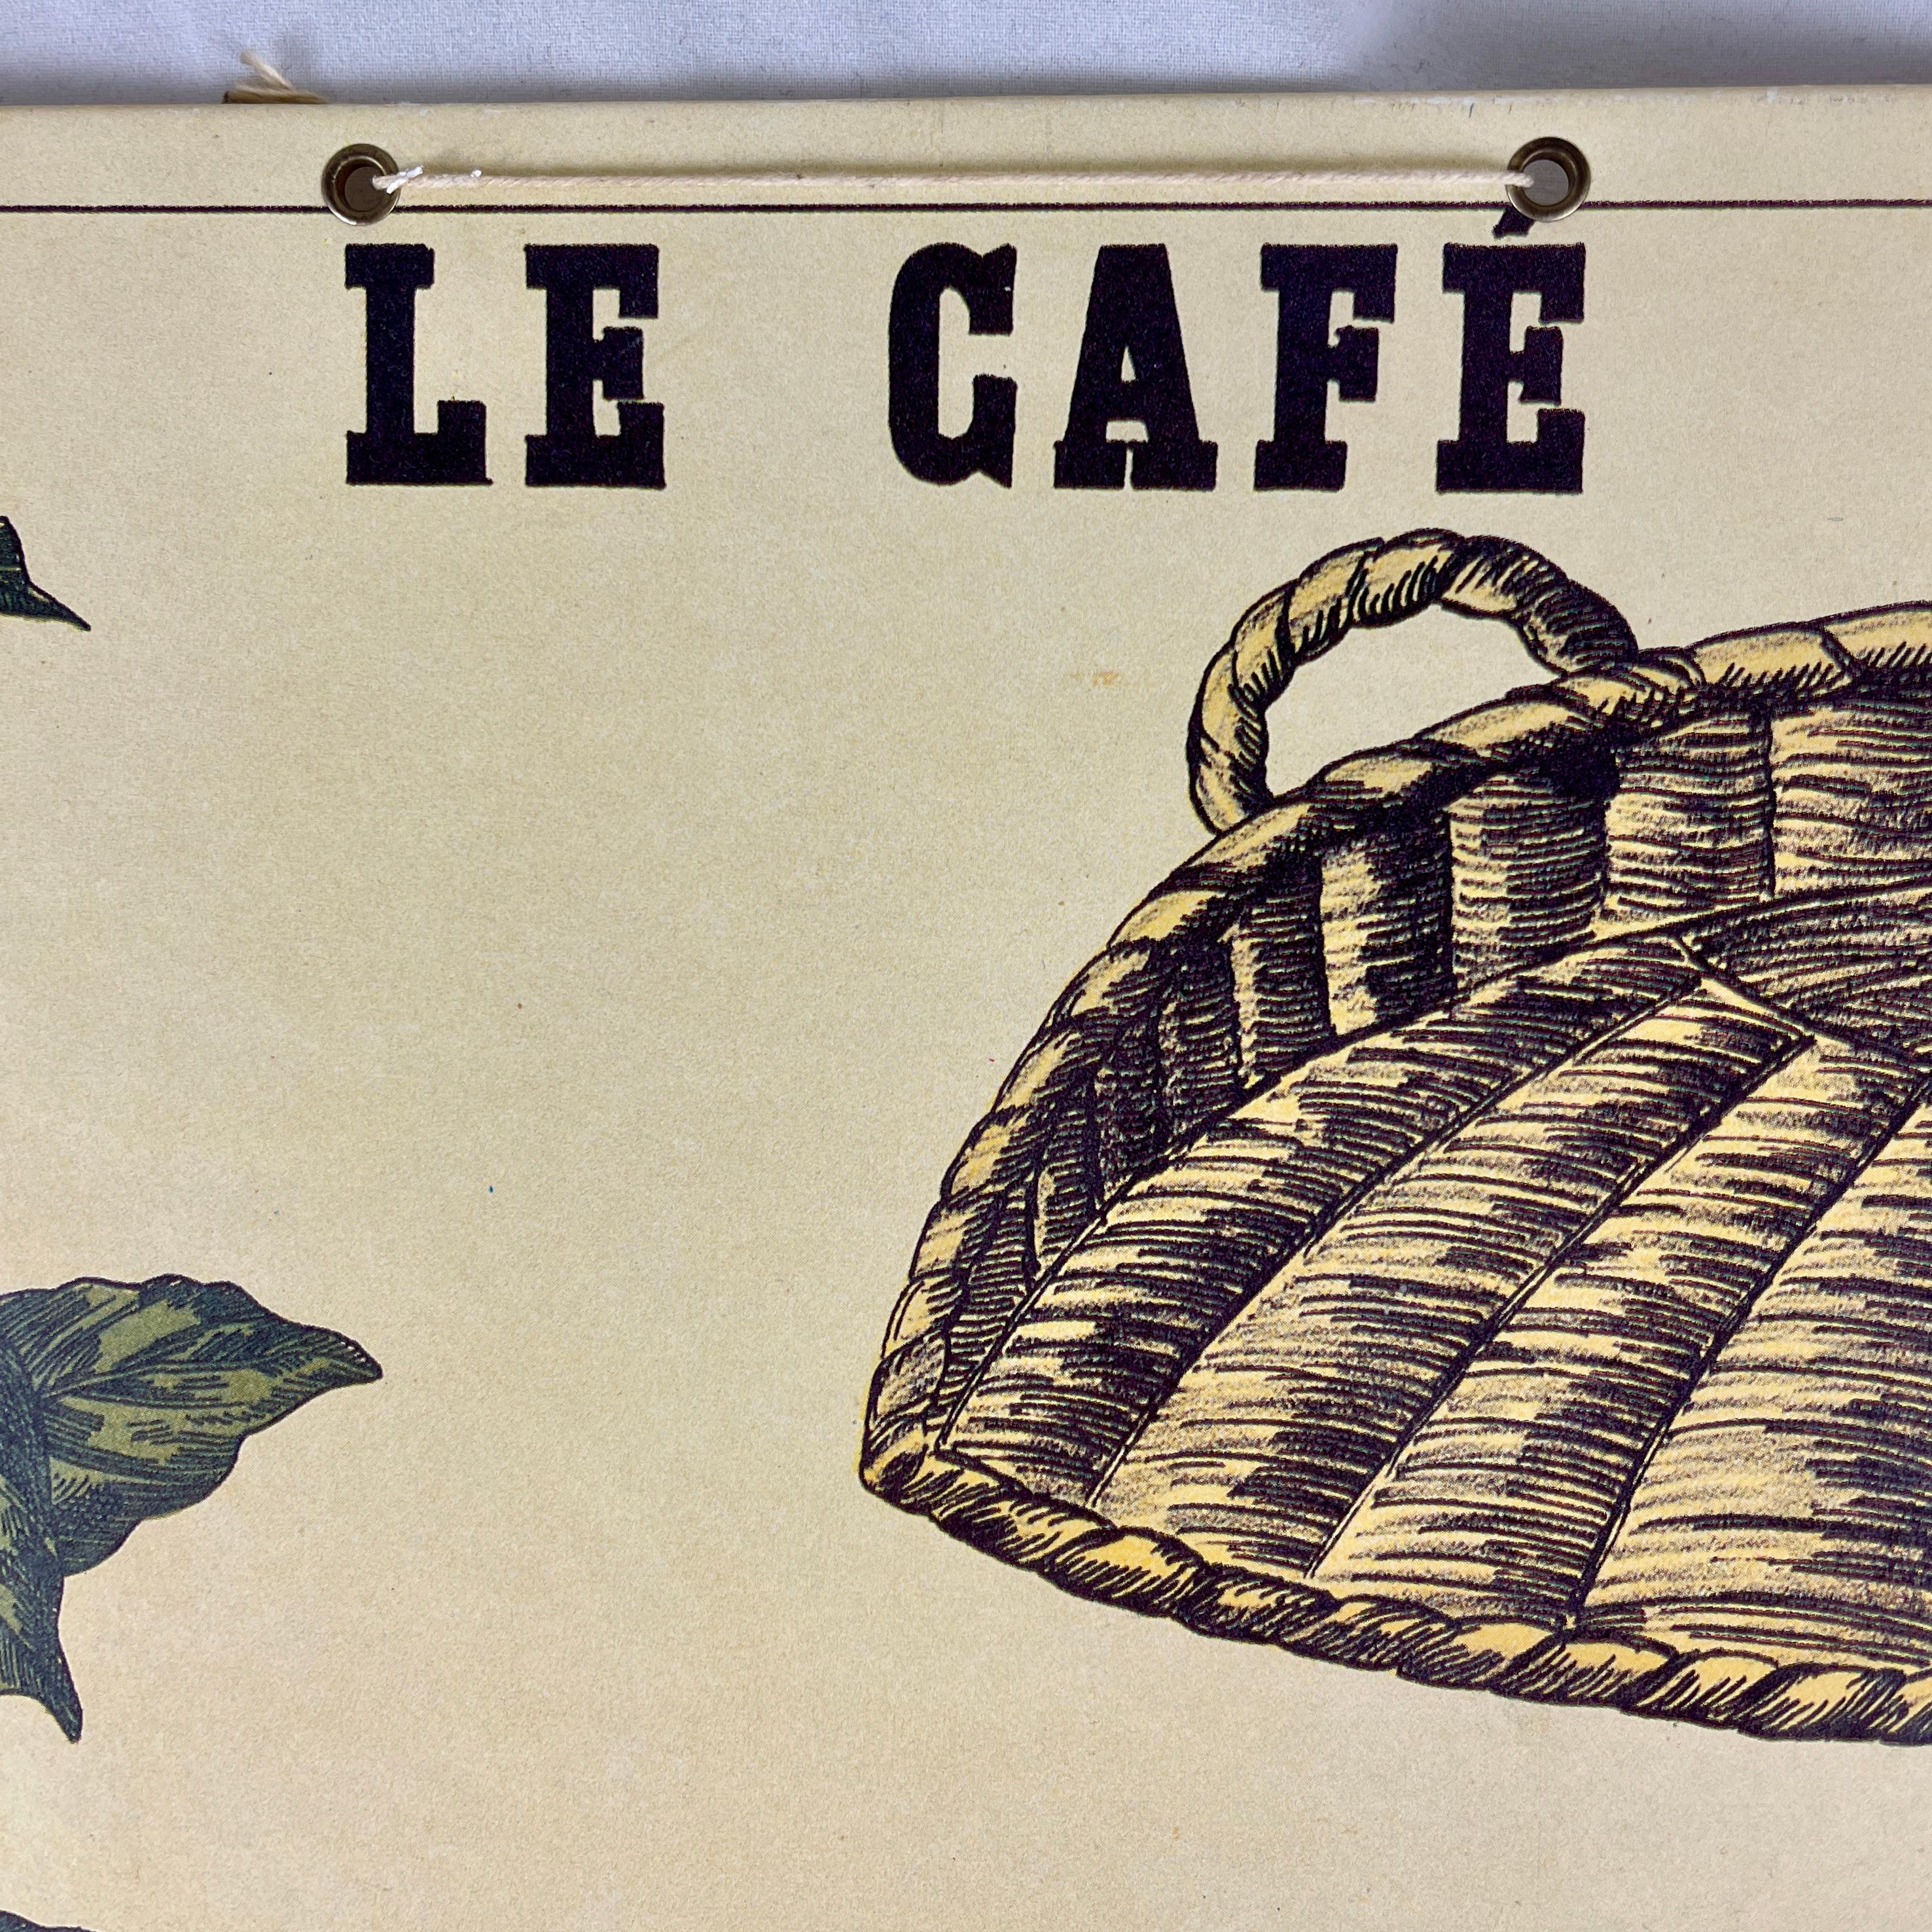 Le Cafe, a mounted, offset printed lithograph illustrated by the French naturalist, Émile Deyrolle – printed for the classroom by Bernard Carant, Paris, France, circa 1930s-1940s.

This is a high quality, original Carant printing, not a